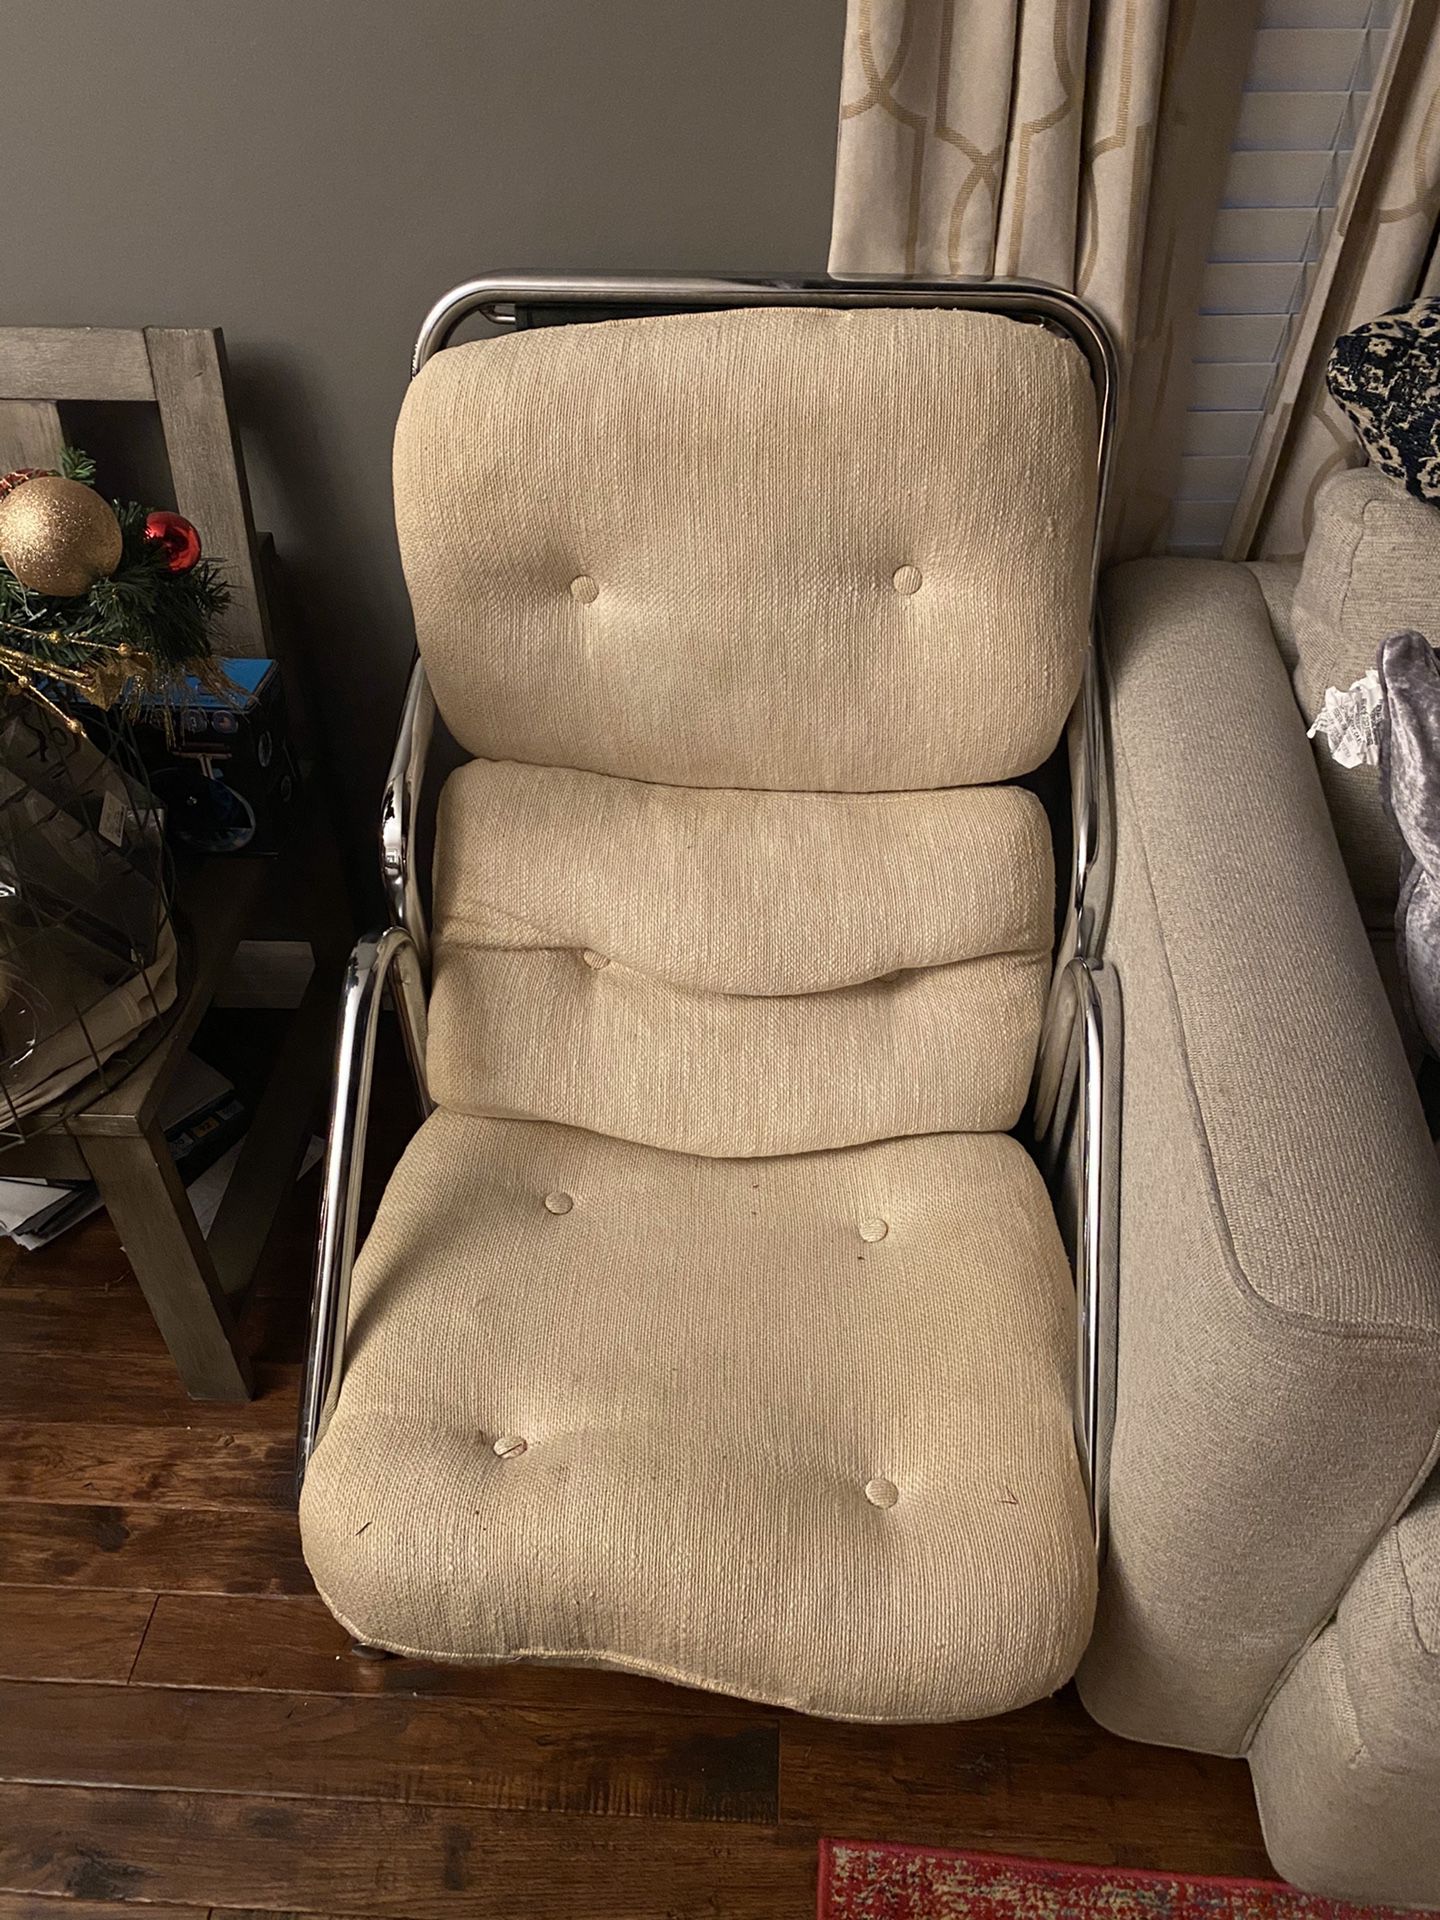 Chair for sale “free delivery “ washable